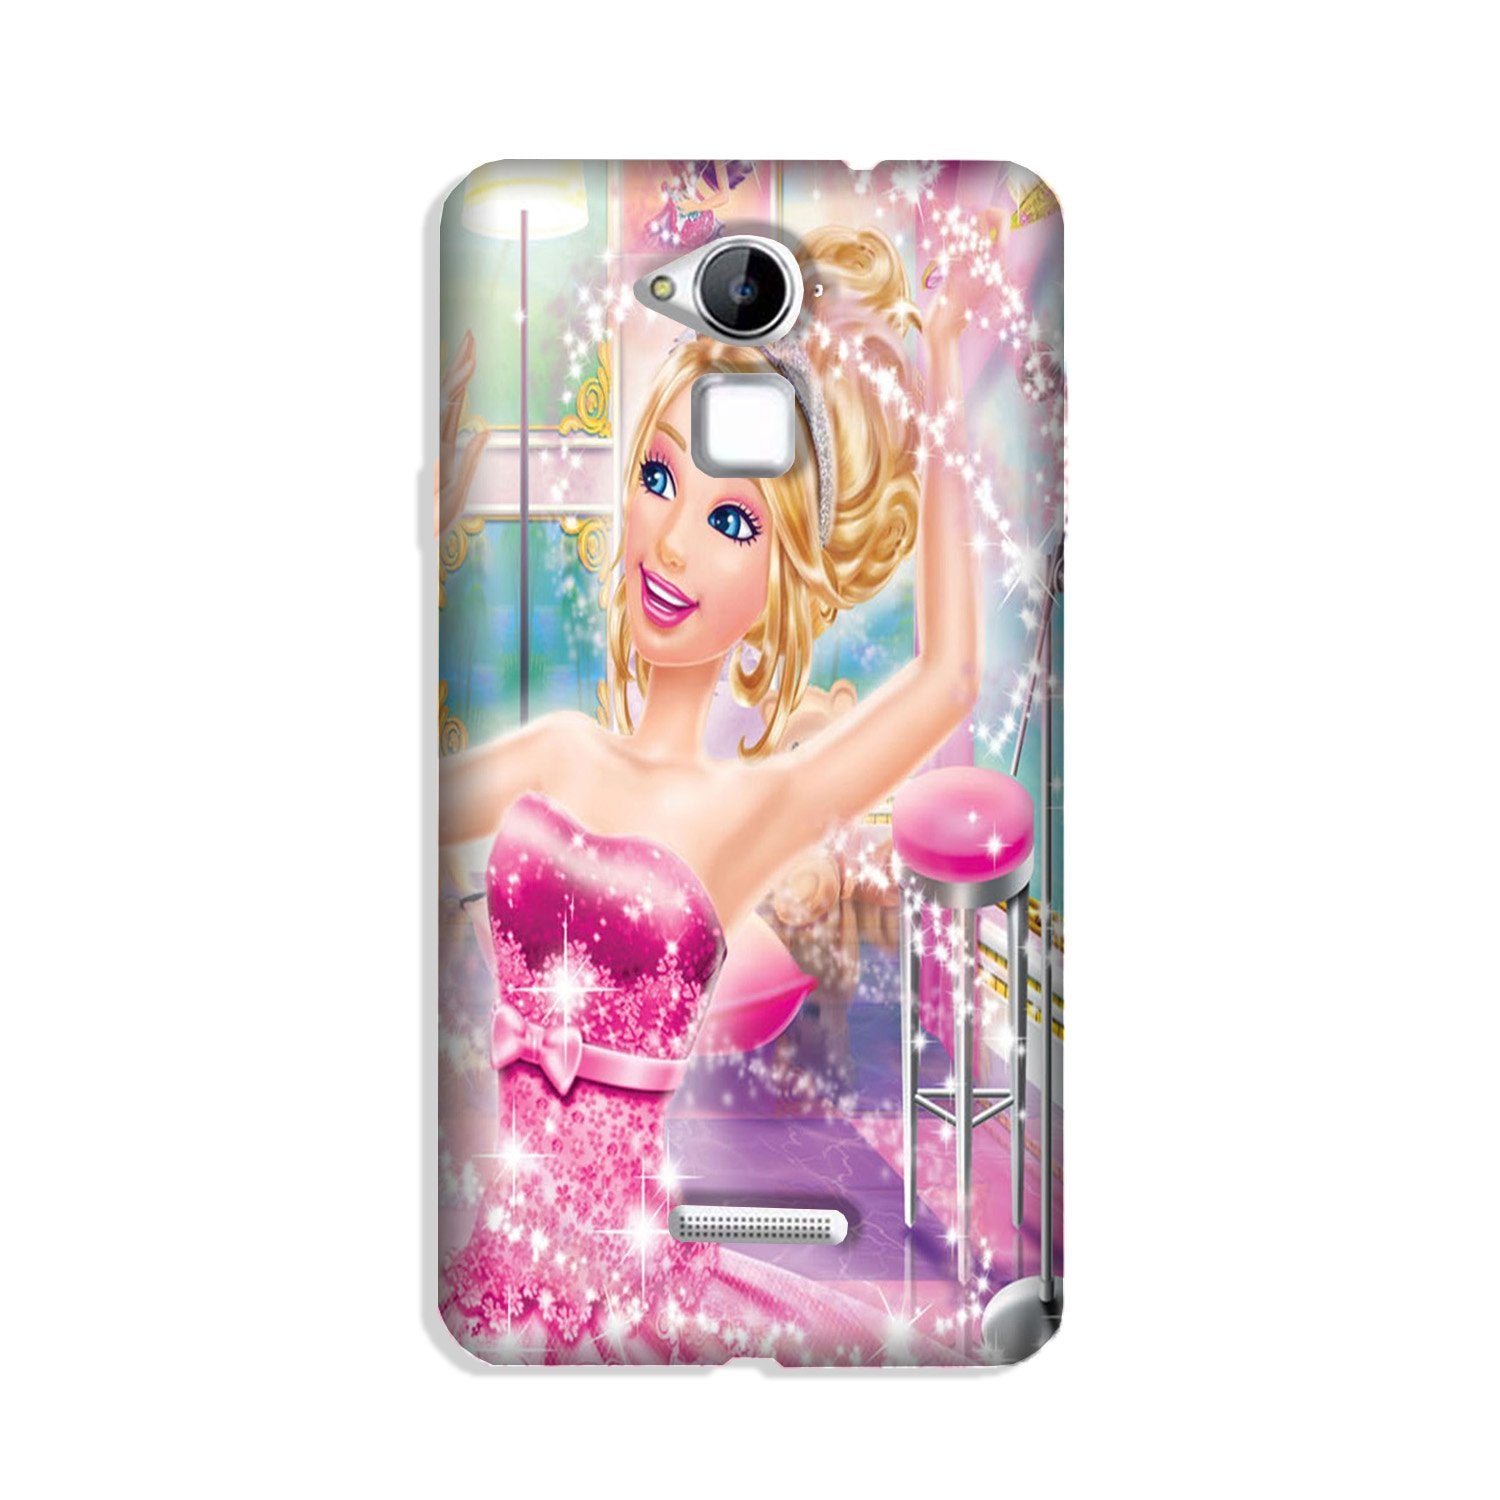 Princesses Case for Coolpad Note 3